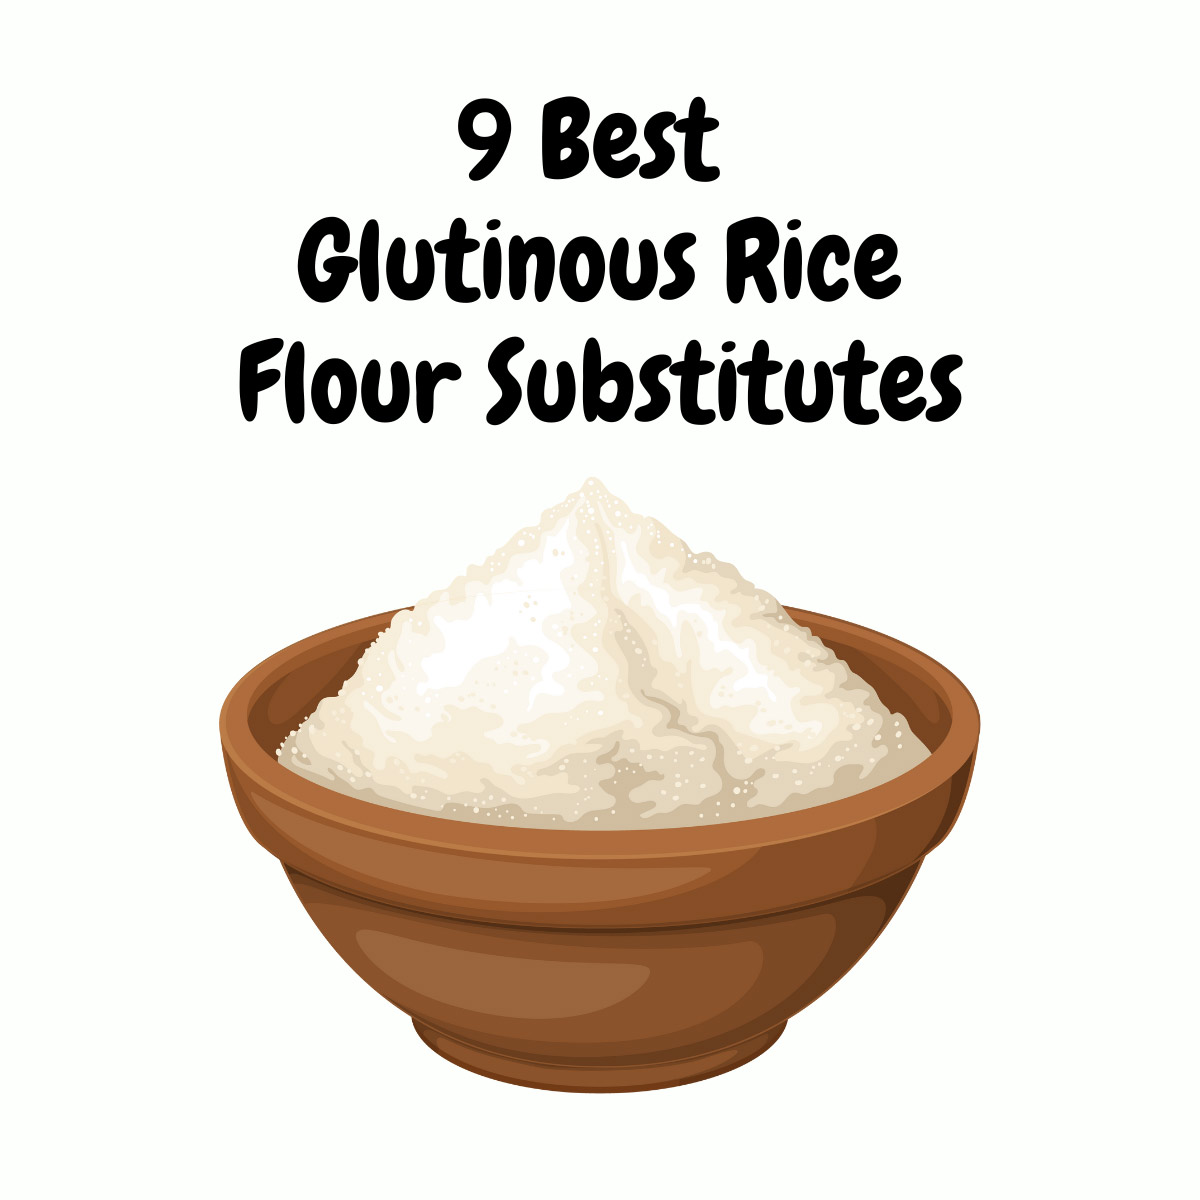 Glutinous Rice Flour Substitute Options featured image | Girl Meets Food